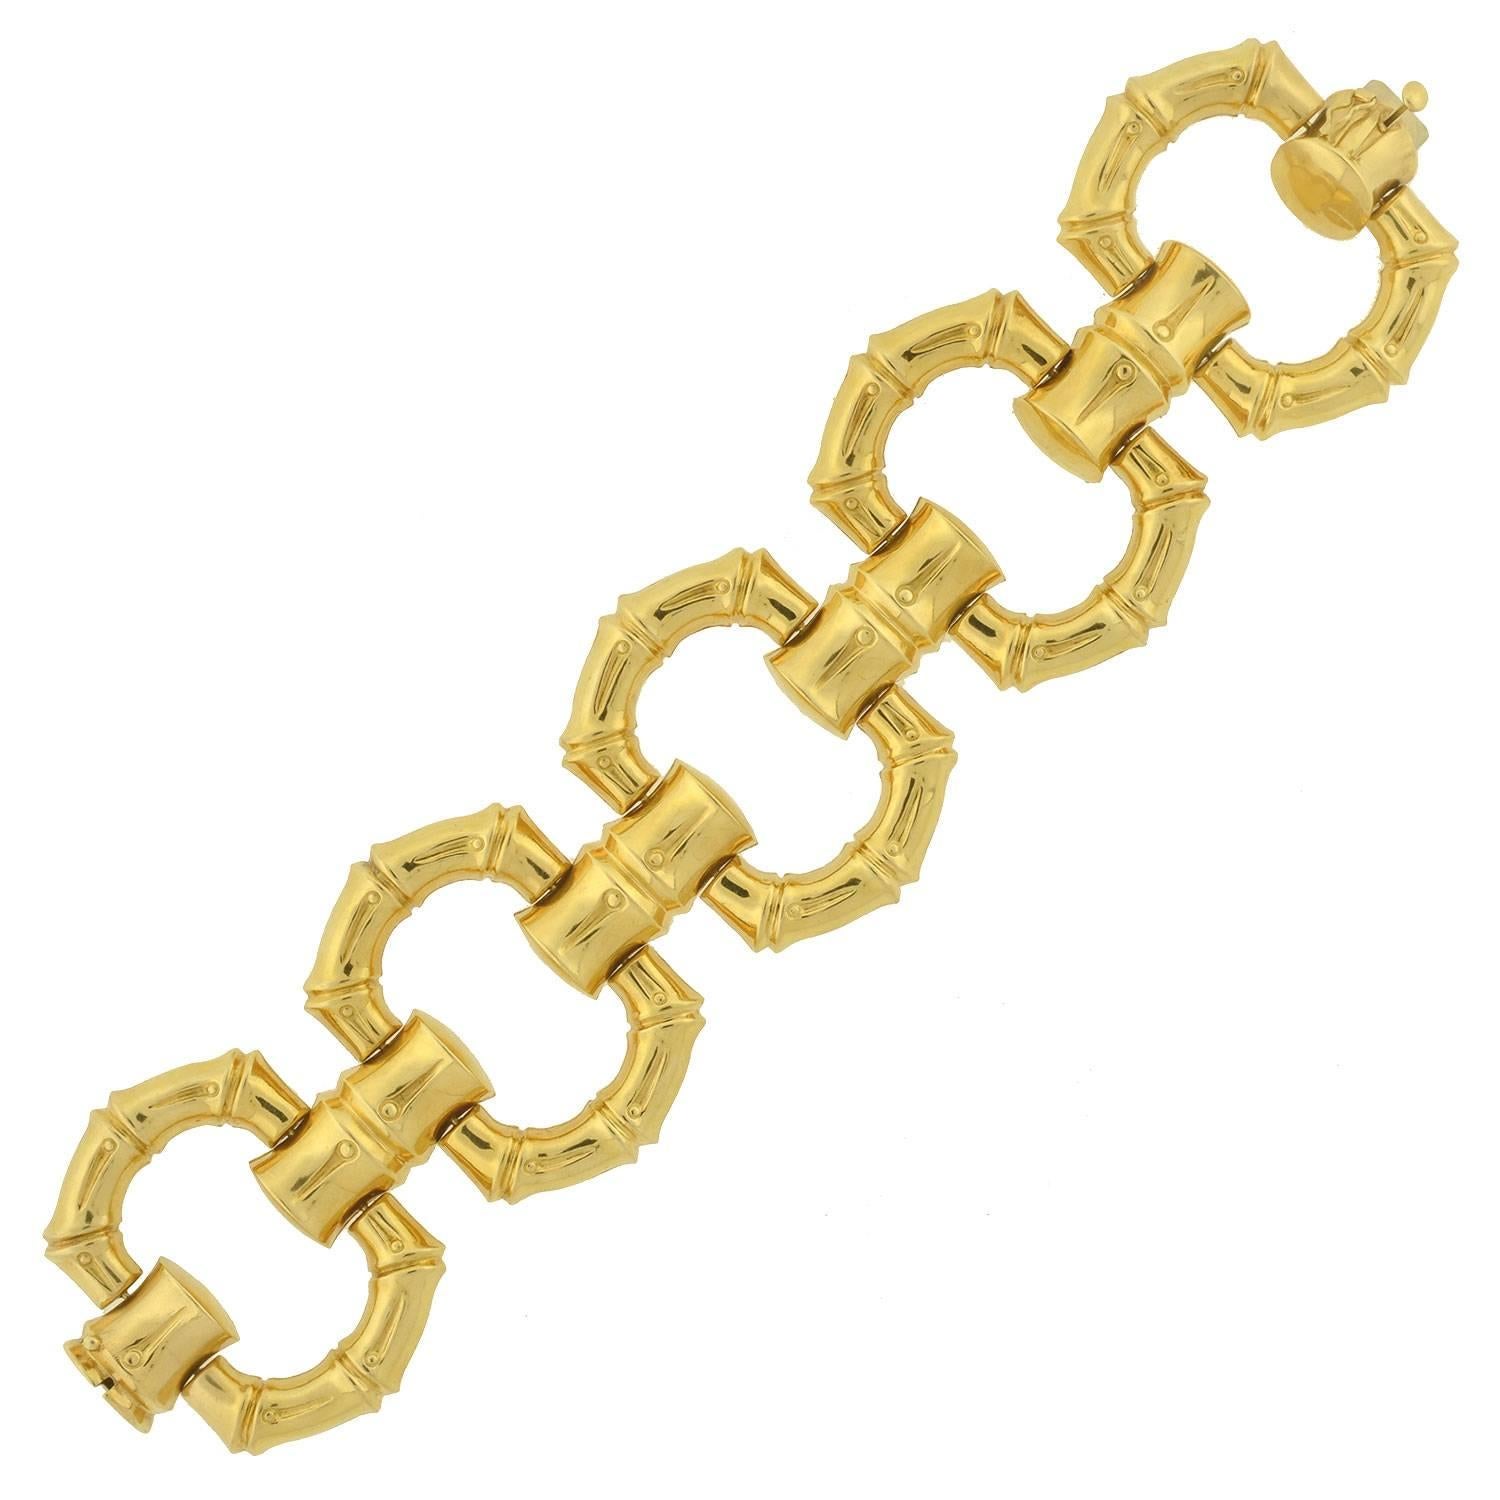 This gold contemporary bracelet makes a very big statement! This stylish piece is made of oversized 18kt yellow gold links and has a very substantial look and feel. Each open link has a smooth surface on one side and a brushed bamboo link gold